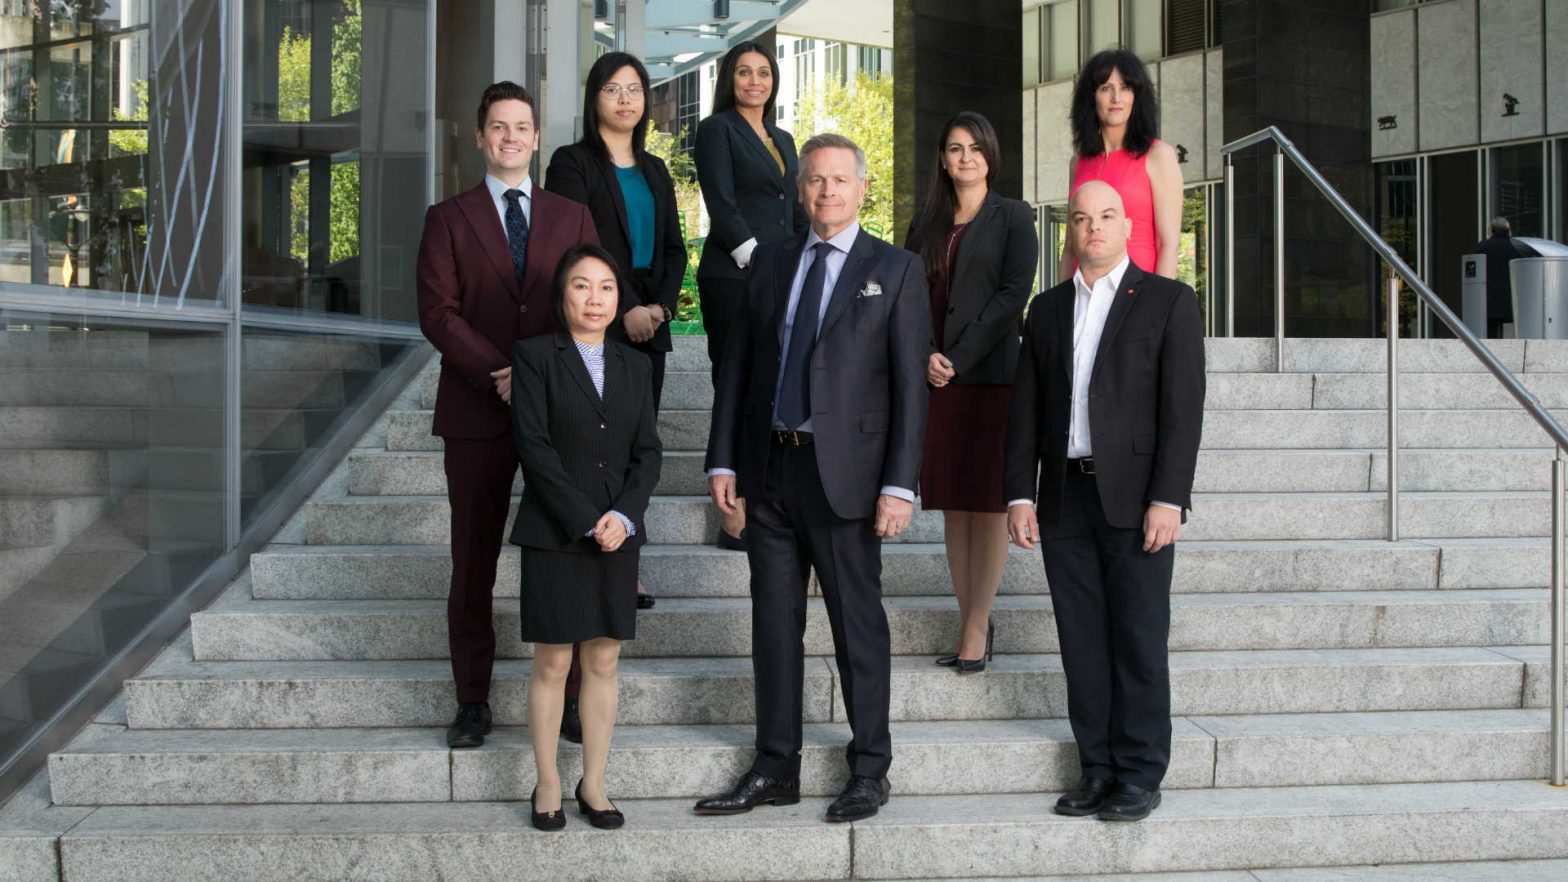 Lawyers Vancouver, MacLean Law